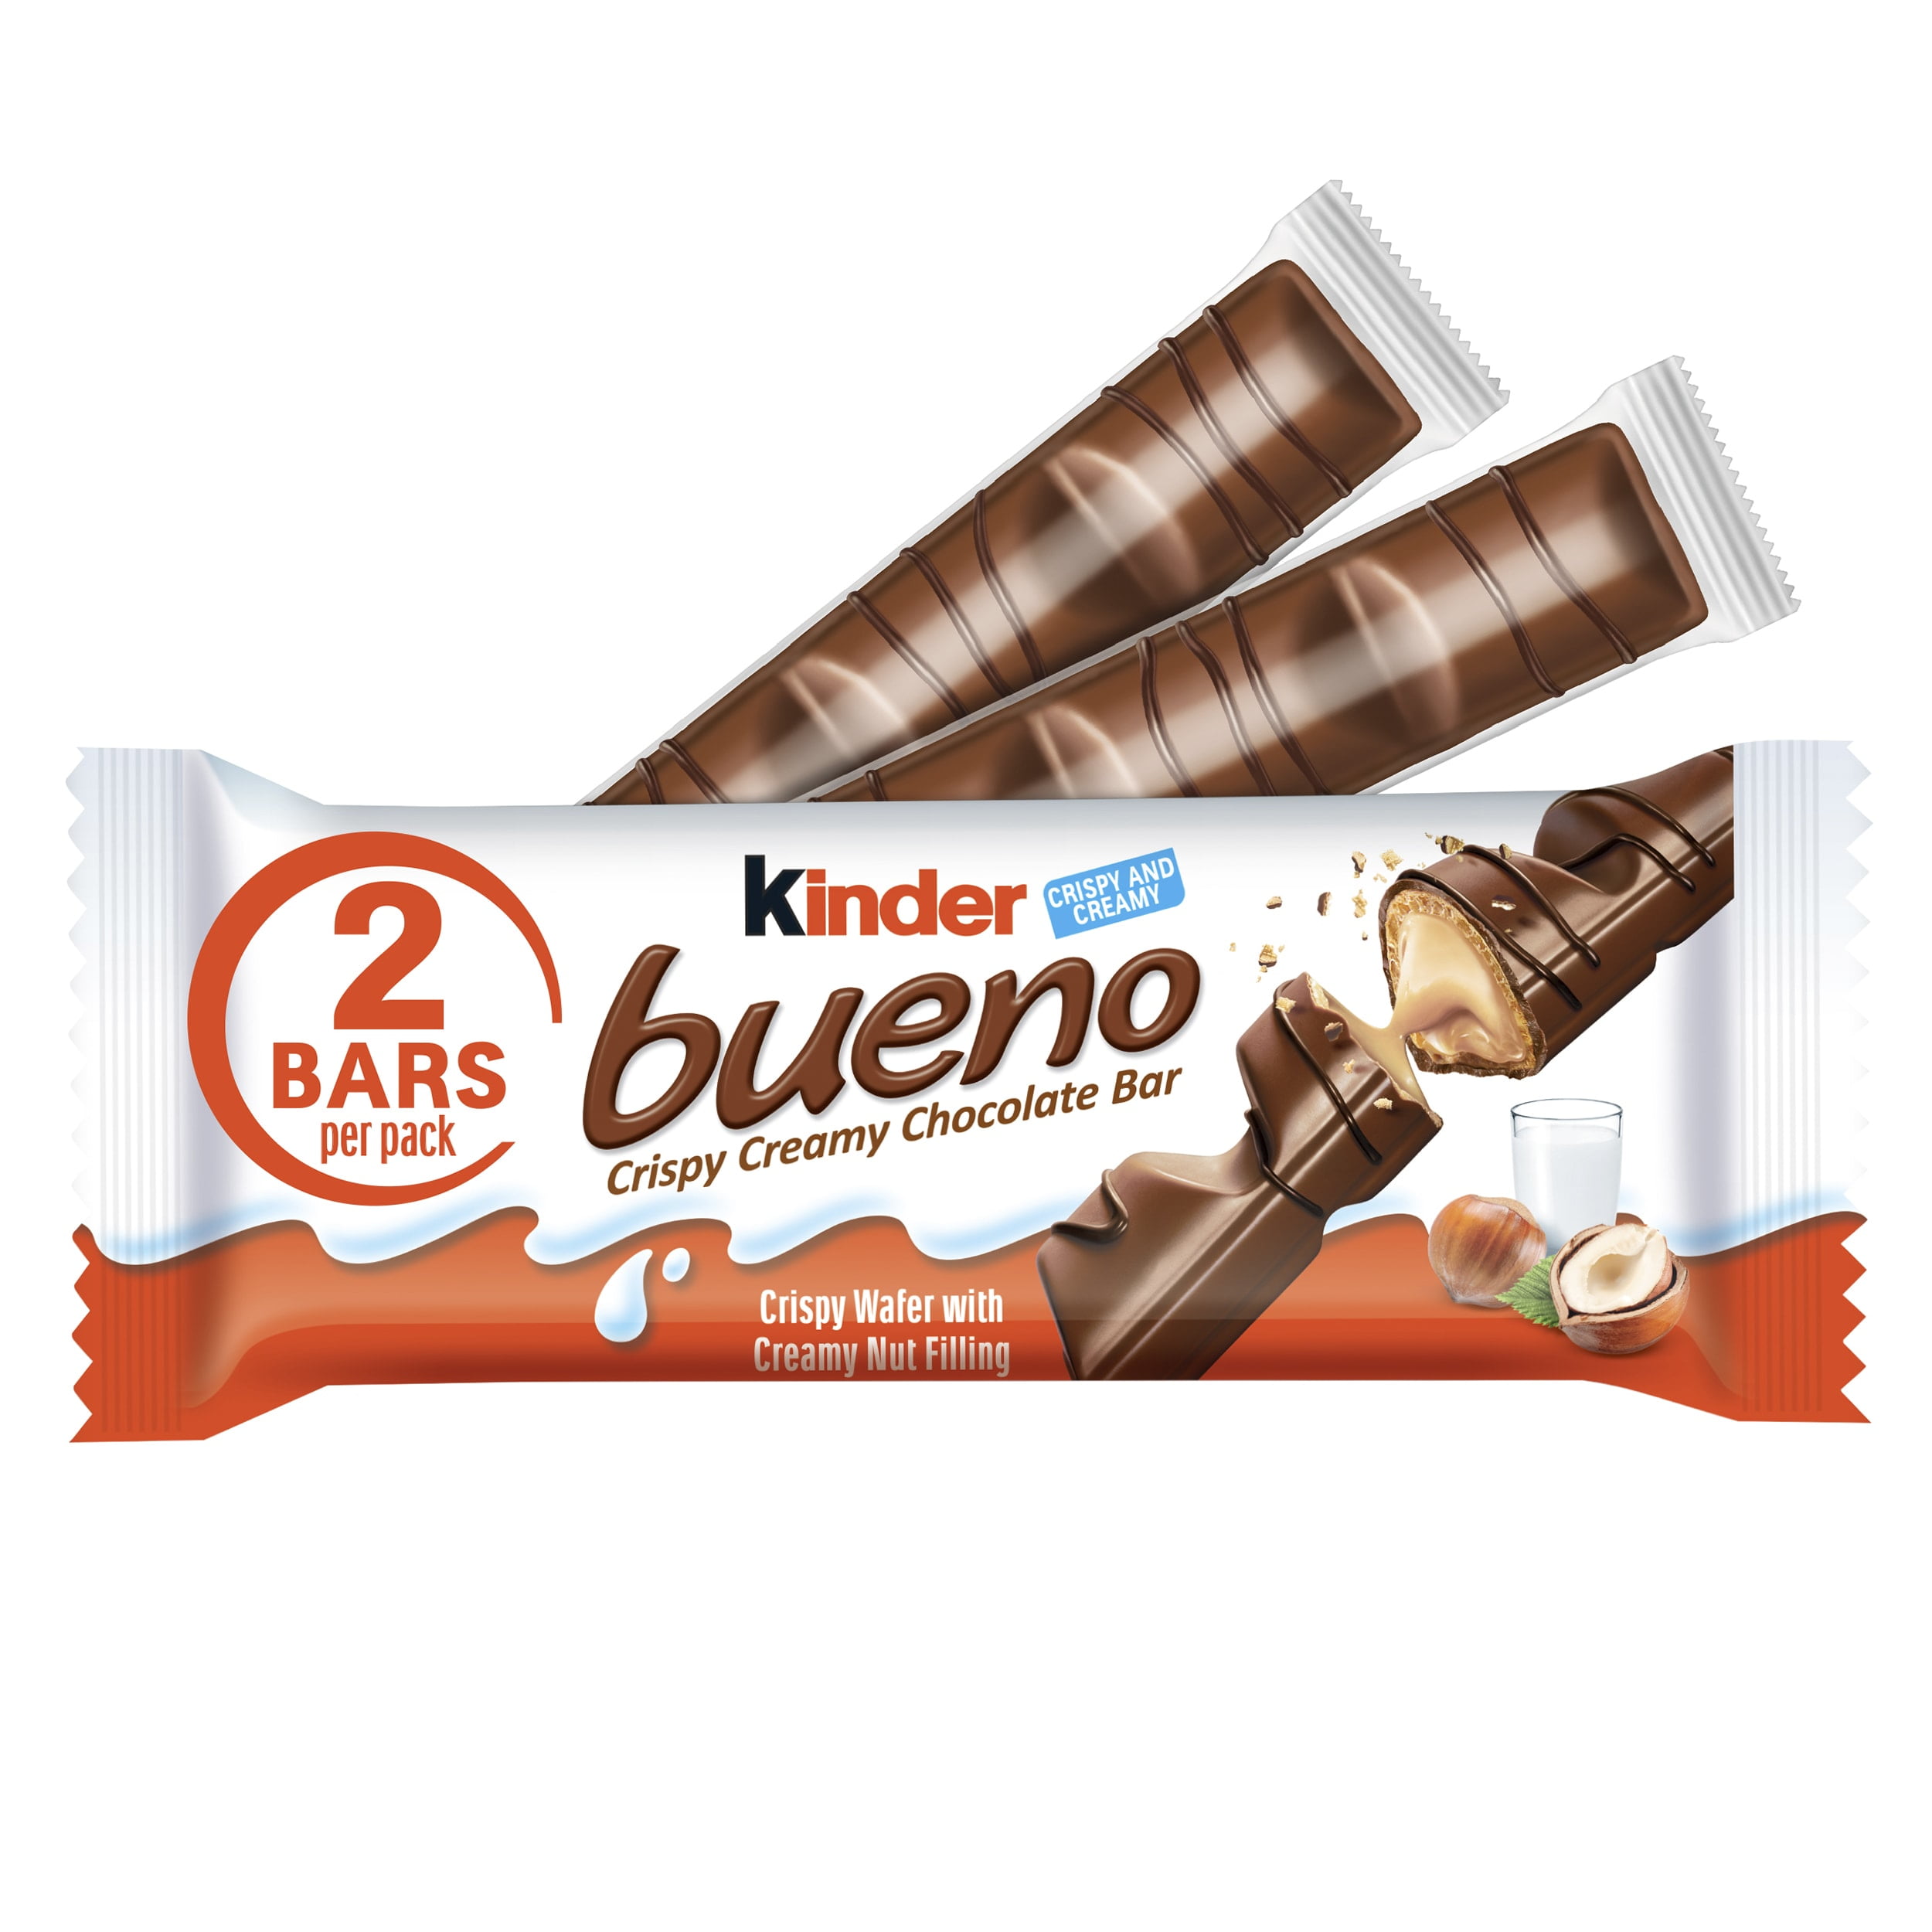 Kinder Bueno Photos, Images and Pictures